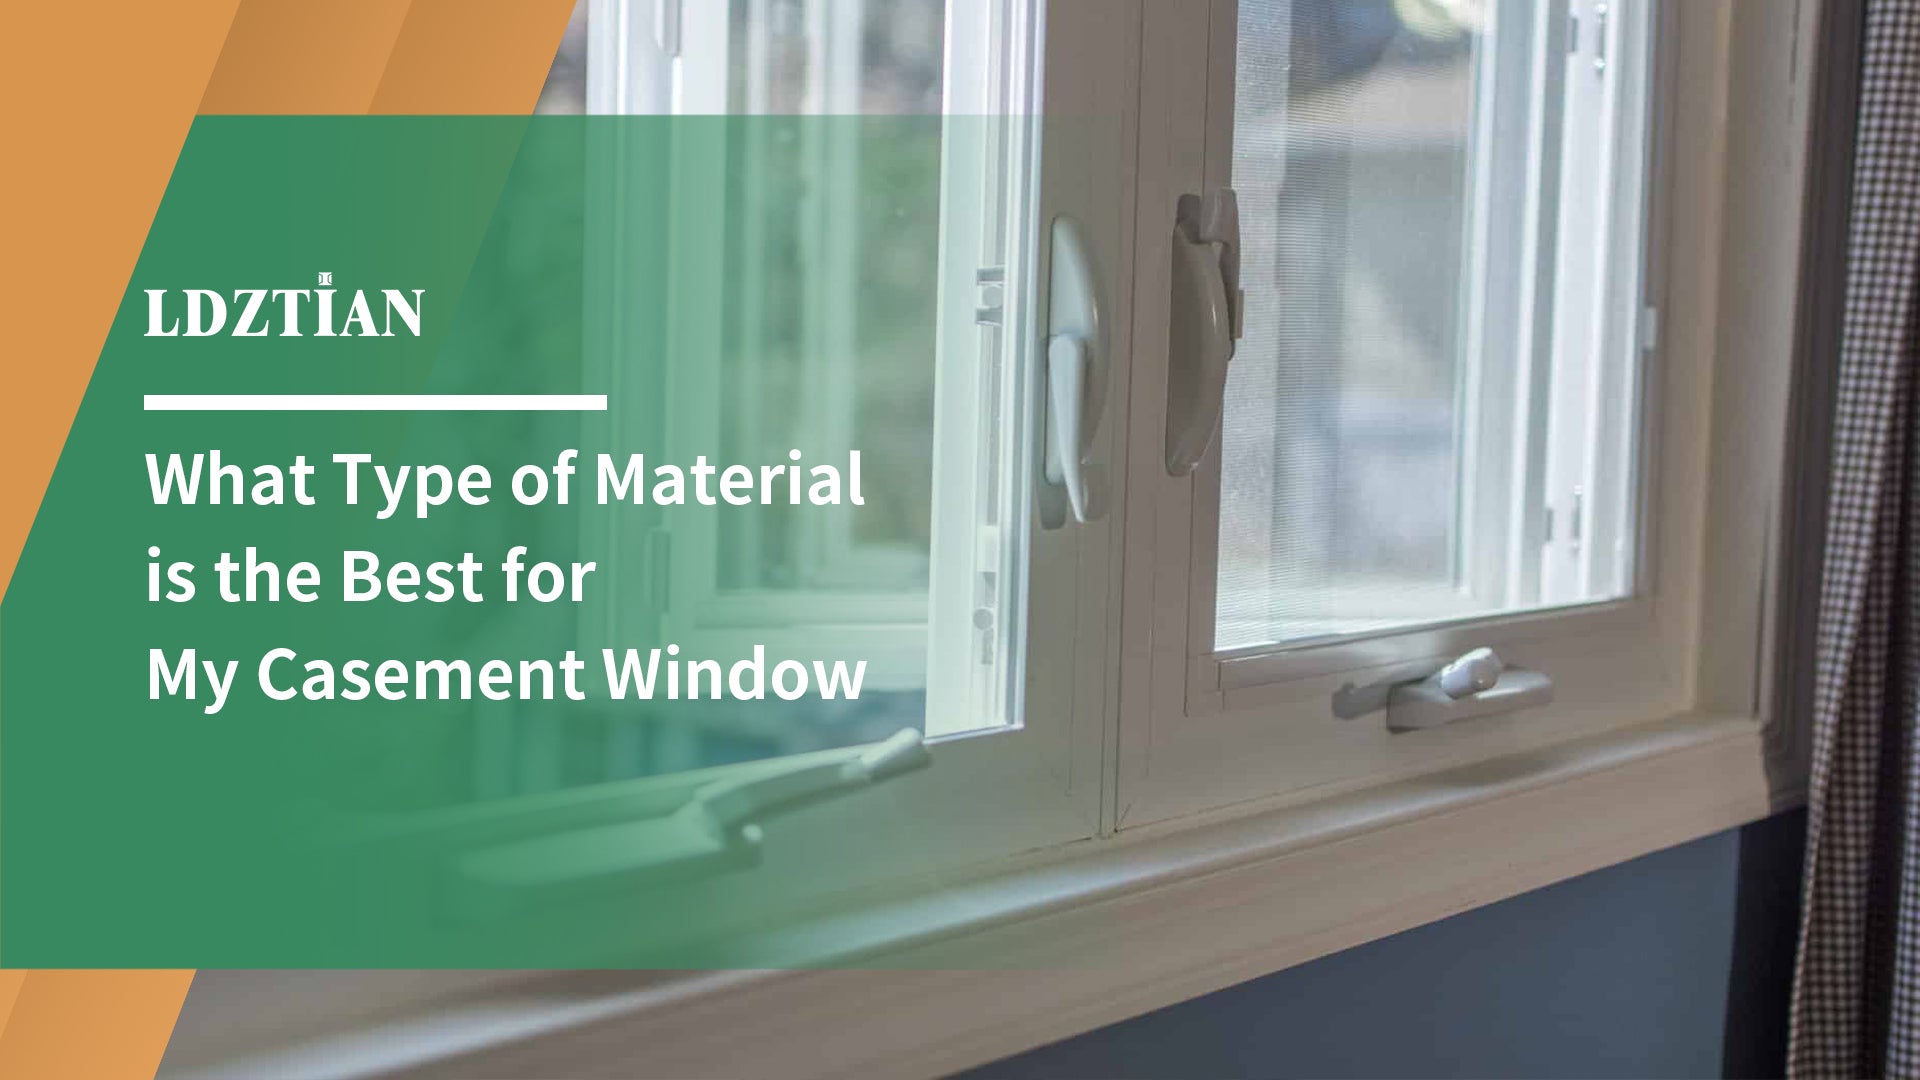 What Type of Material is the Best for My Casement Window?